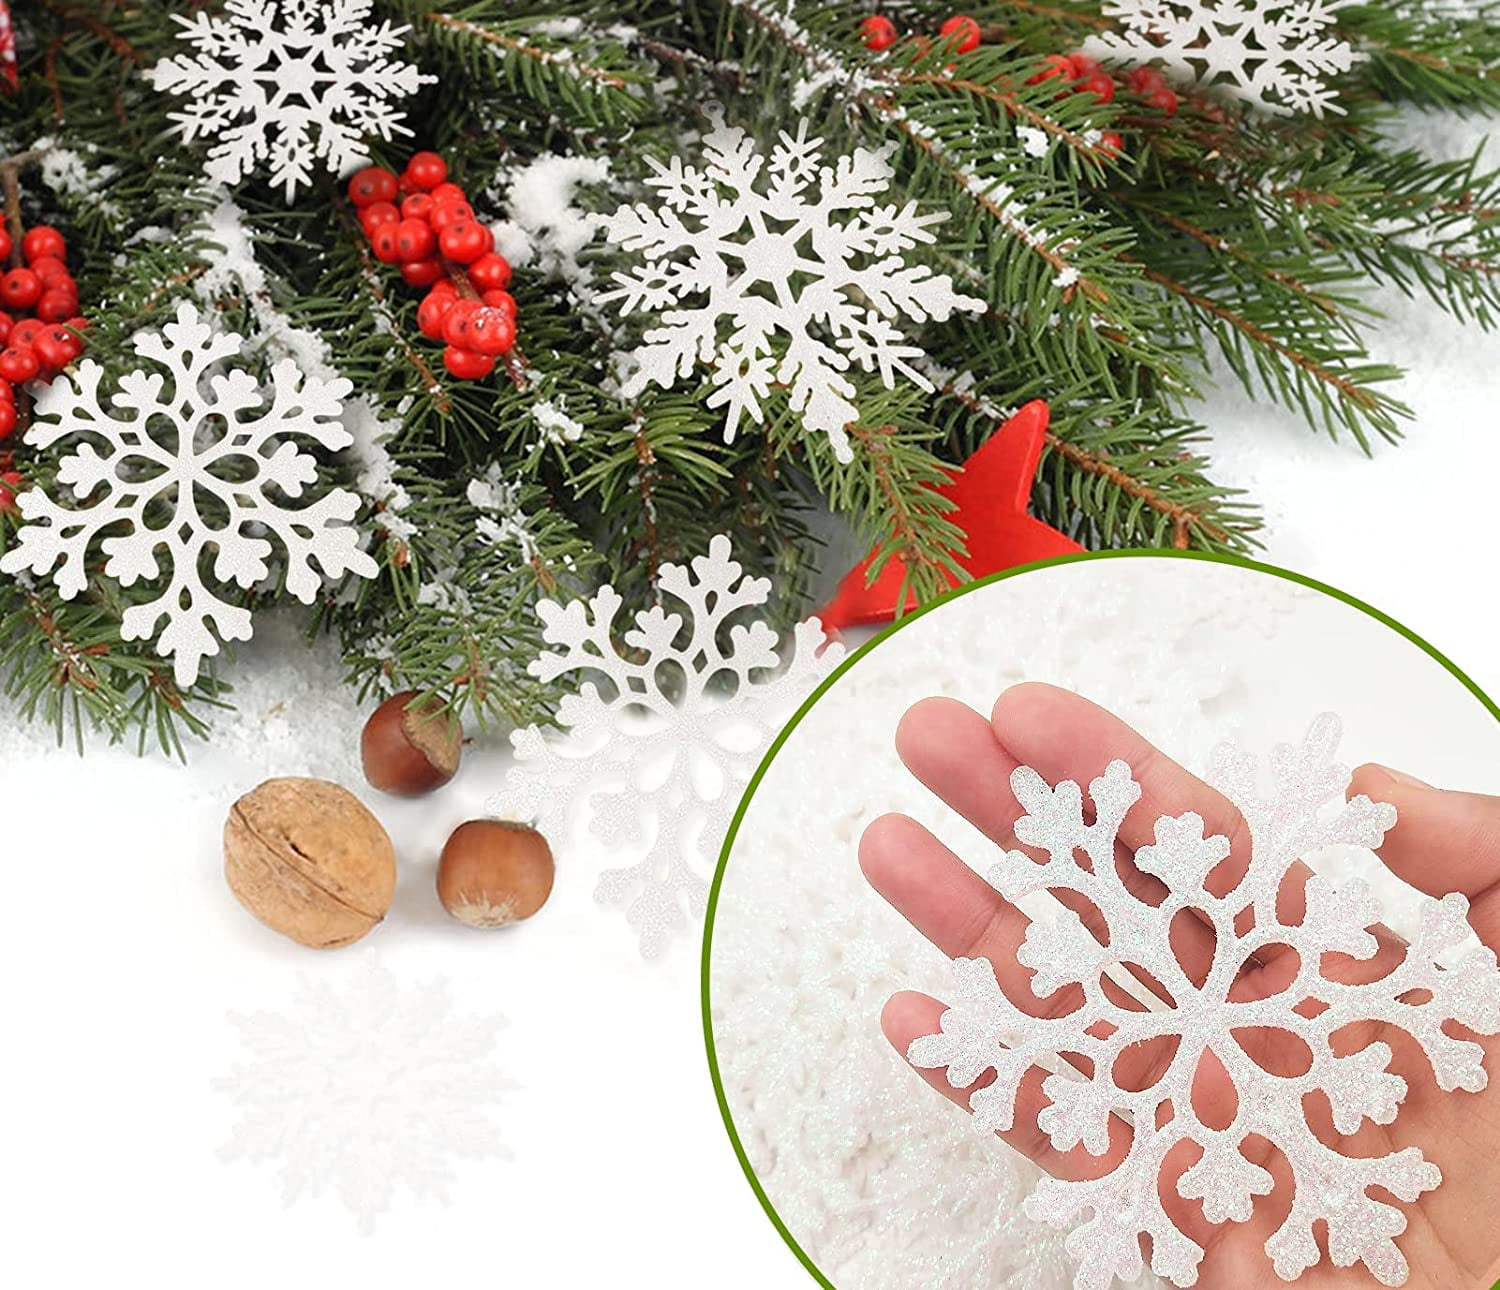 Newhomestyle 36pcs Christmas White Snowflake Ornaments Plastic Glitter Snow  Flakes Ornaments for Winter Christmas Tree Decorations Size Varies Craft